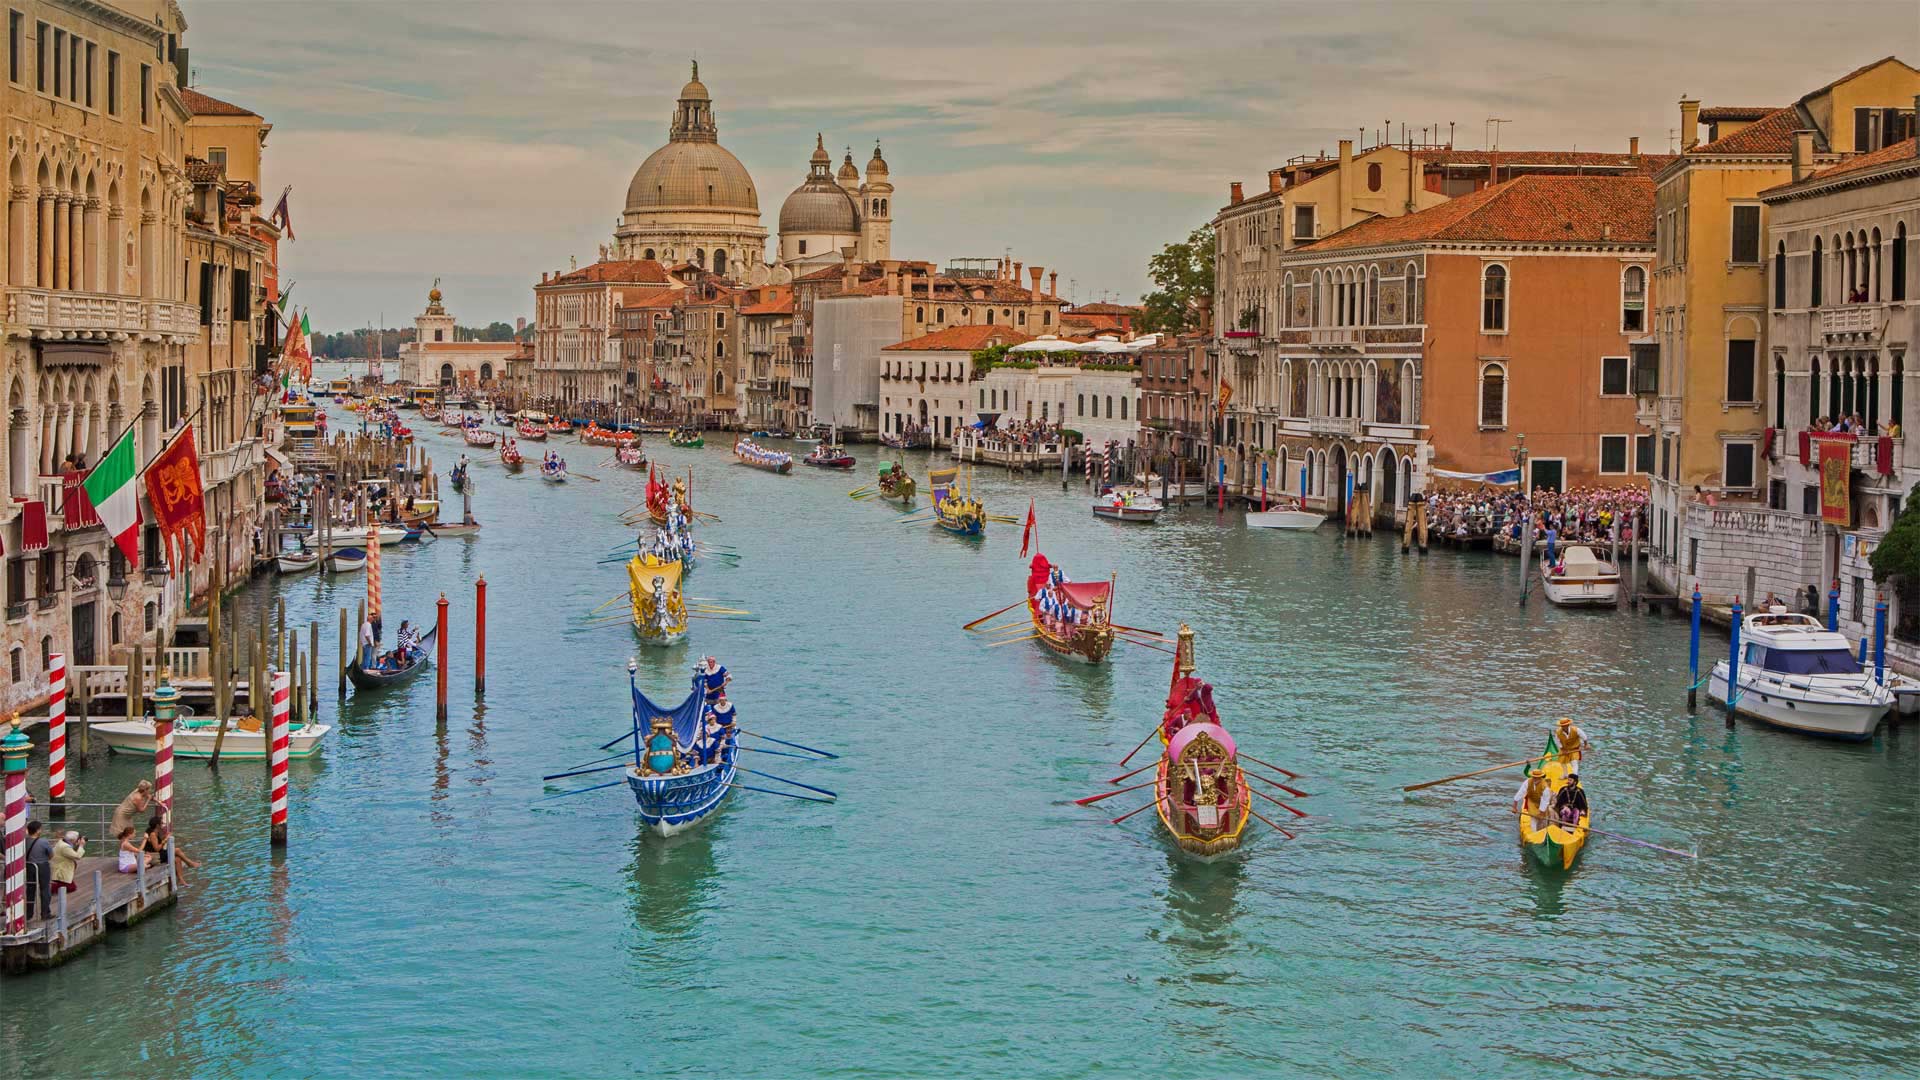 The Regata Storica on the Grand Canal in Venice, Italy - Alexander Duffner/Alamy)